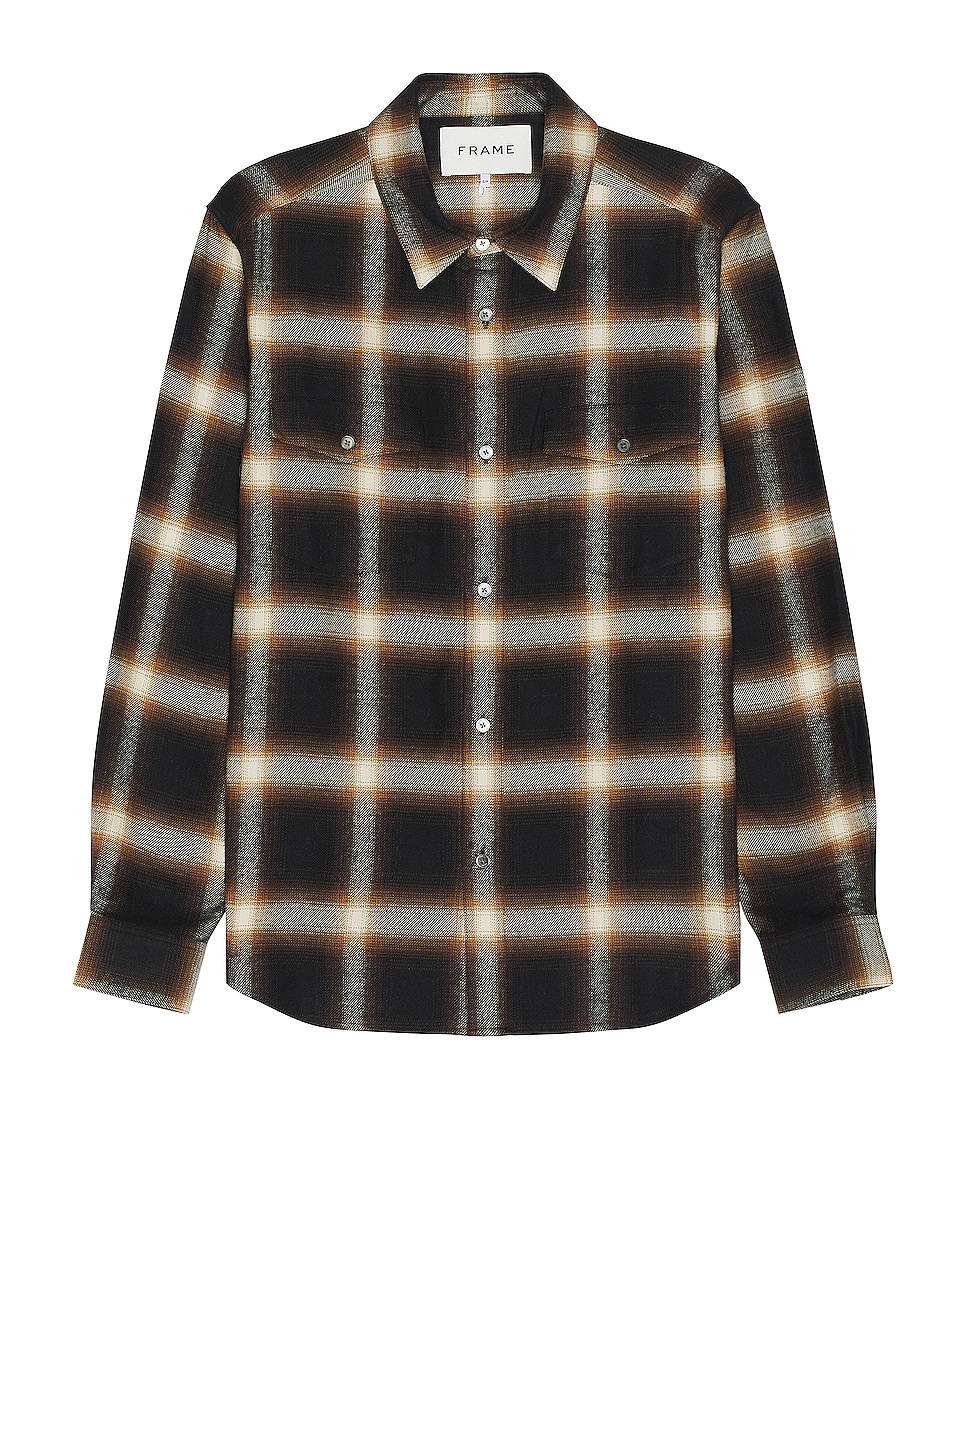 Image 1 of FRAME Brushed Cotton Plaid Shirt in Marron